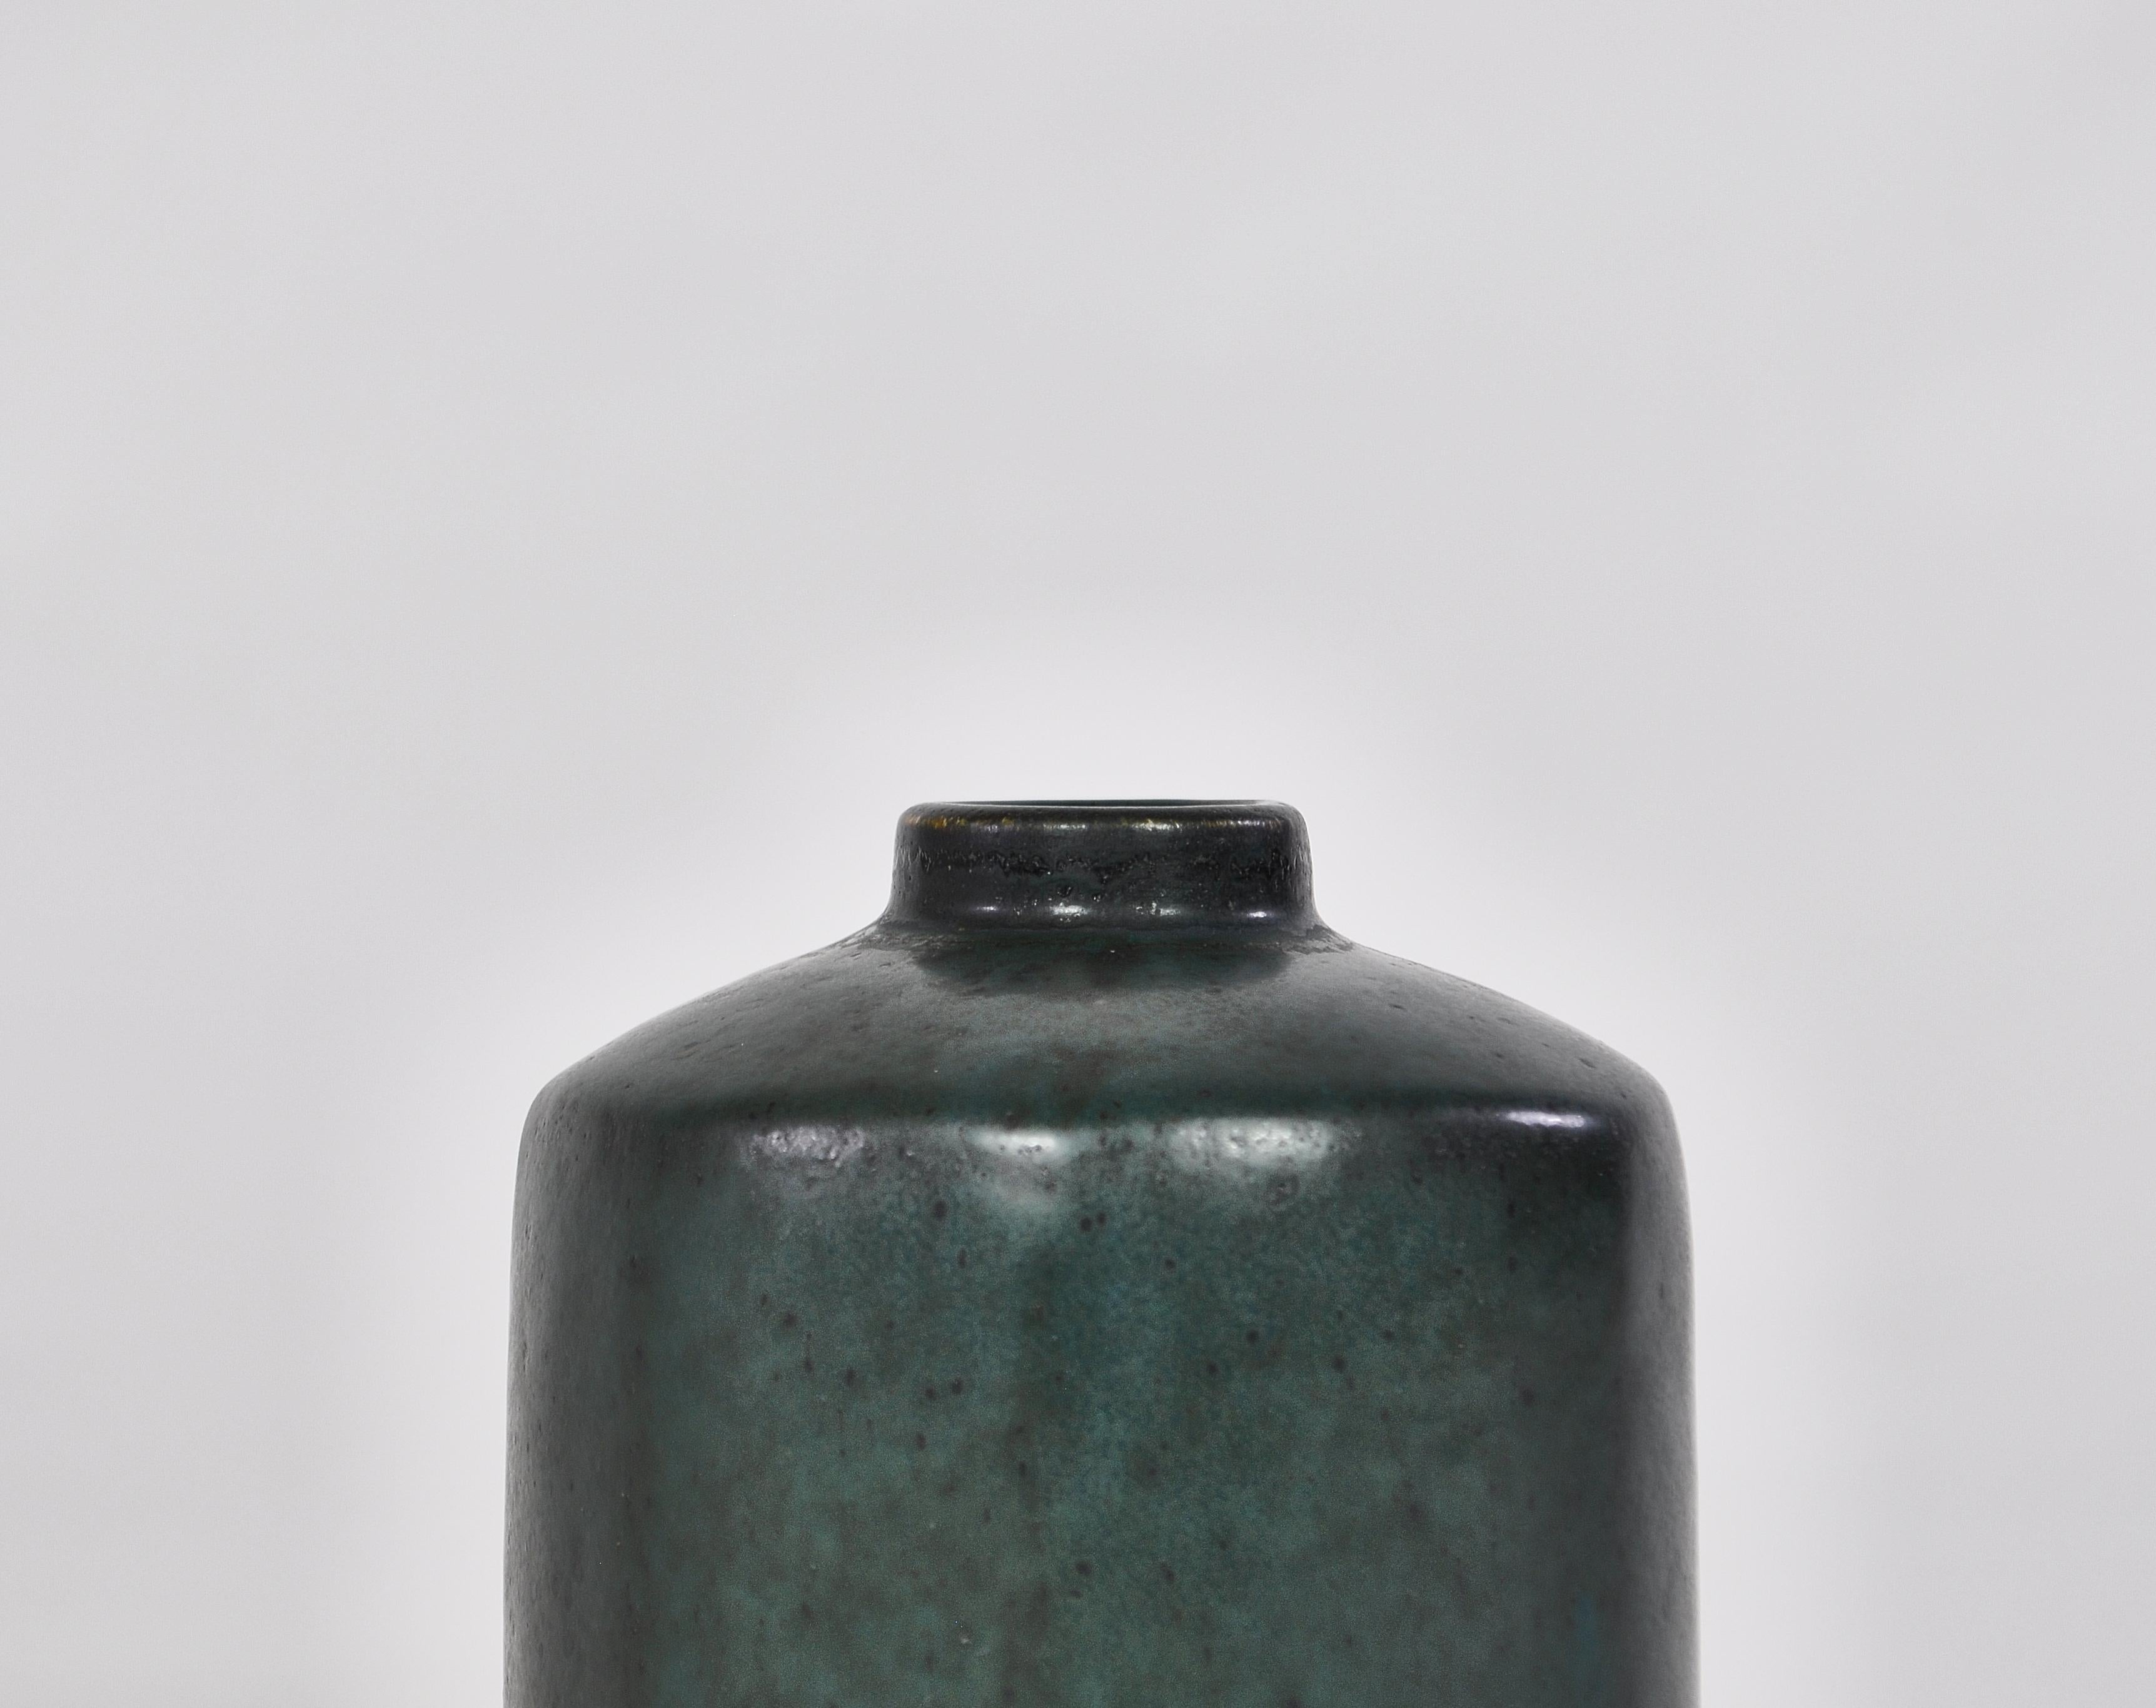 Scandinavian Modern stoneware vase with mottled dark green glaze by Carl-Harry Staalhane for Rörstrand, Sweden in the 1960s. Factory first and mint condition.